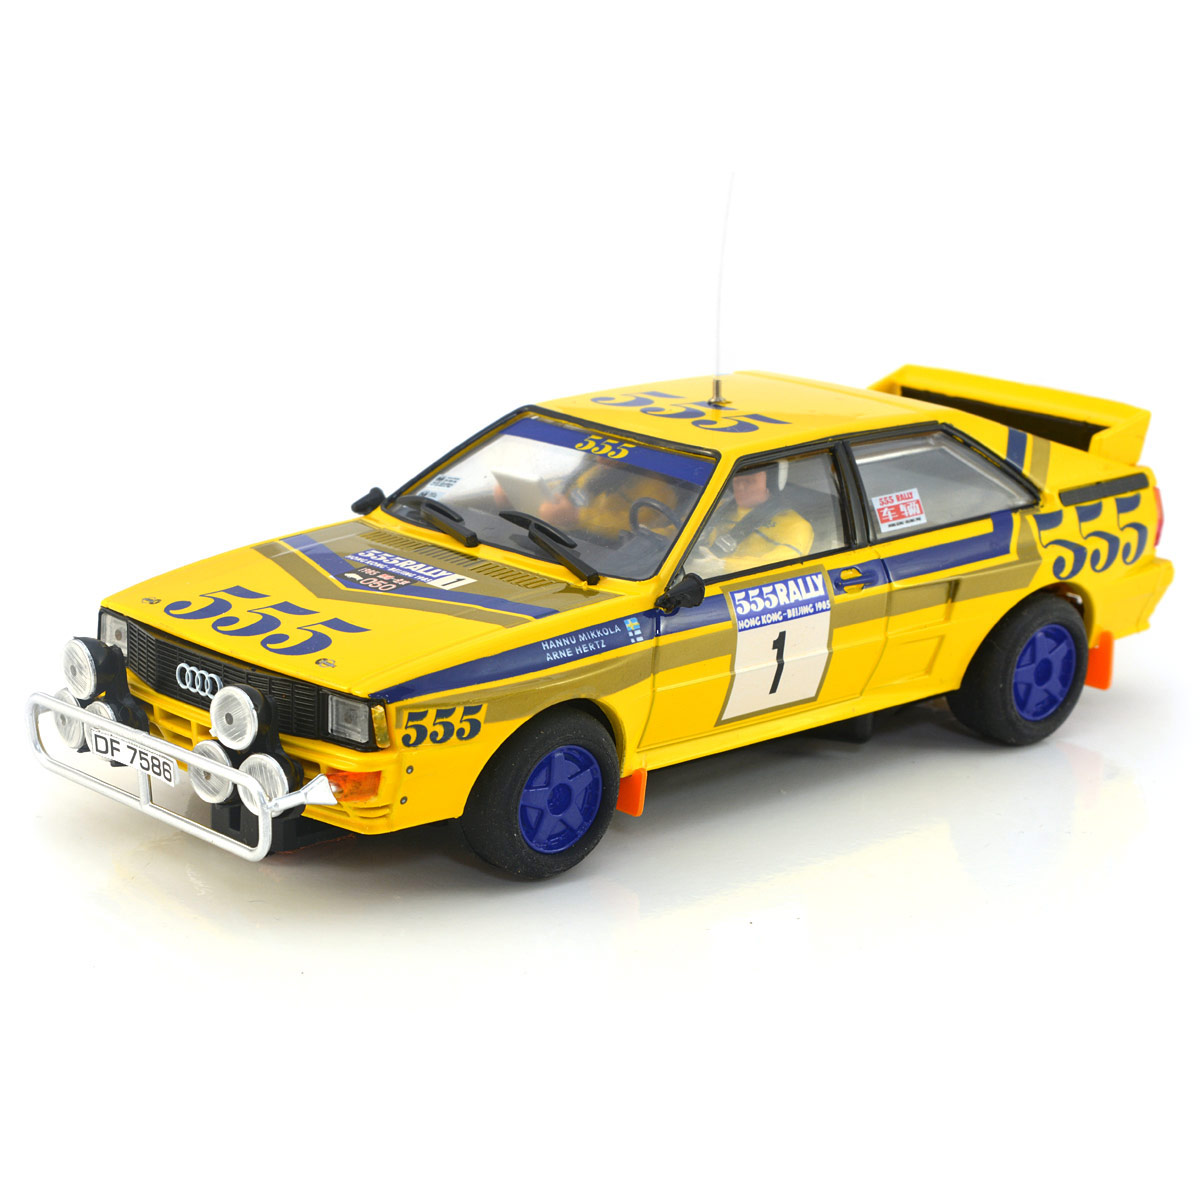 Details about   Supertoys Audi Quattro rally car See description Plastic made in Hong Kong 